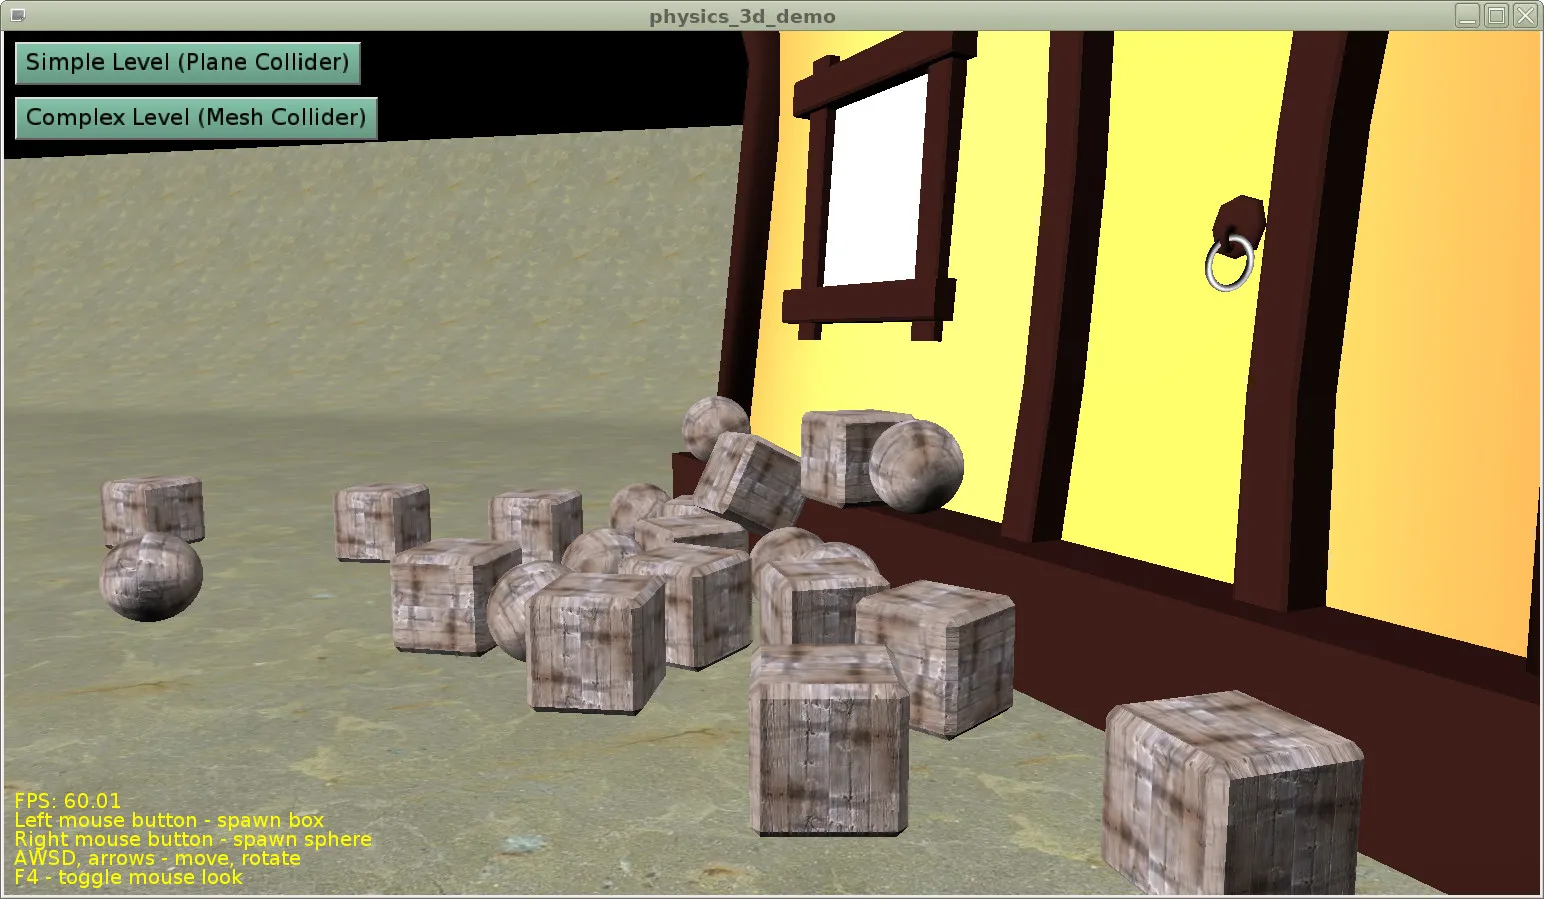 Castle Game Engine – Open-Source 3D and 2D Game Engine